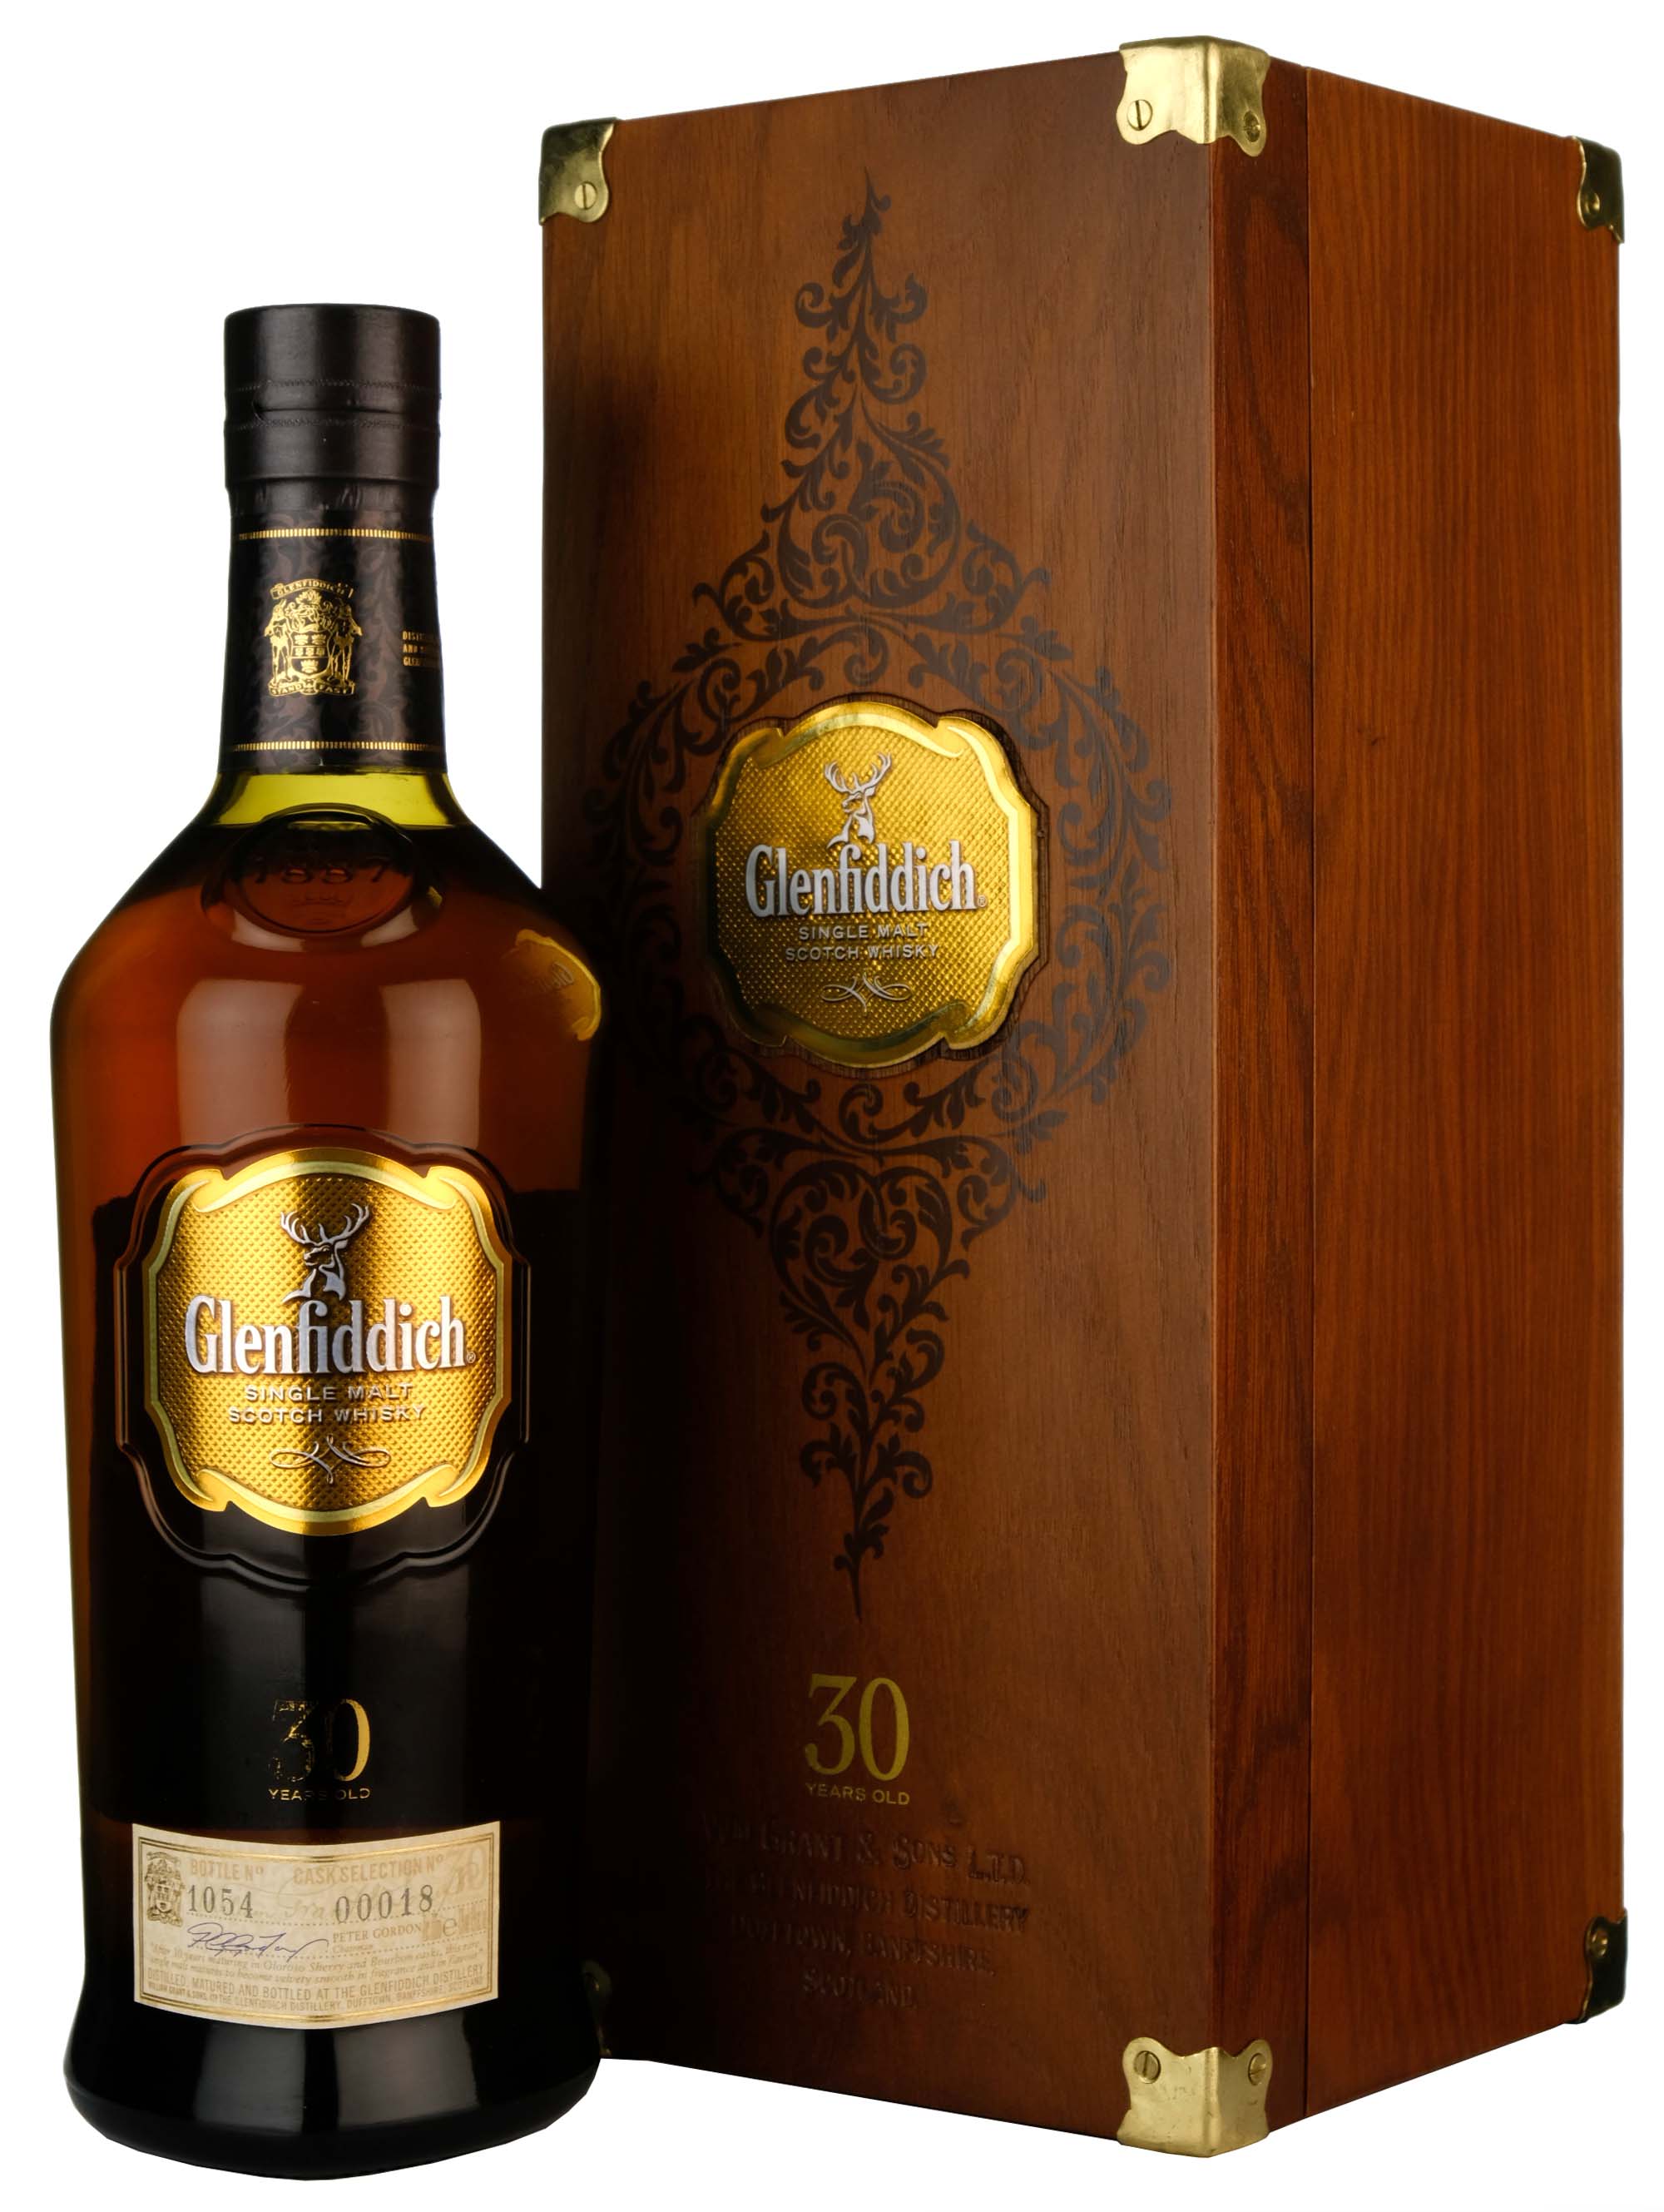 Glenfiddich 30 Year Old Cask Selection 00018 | 2010s